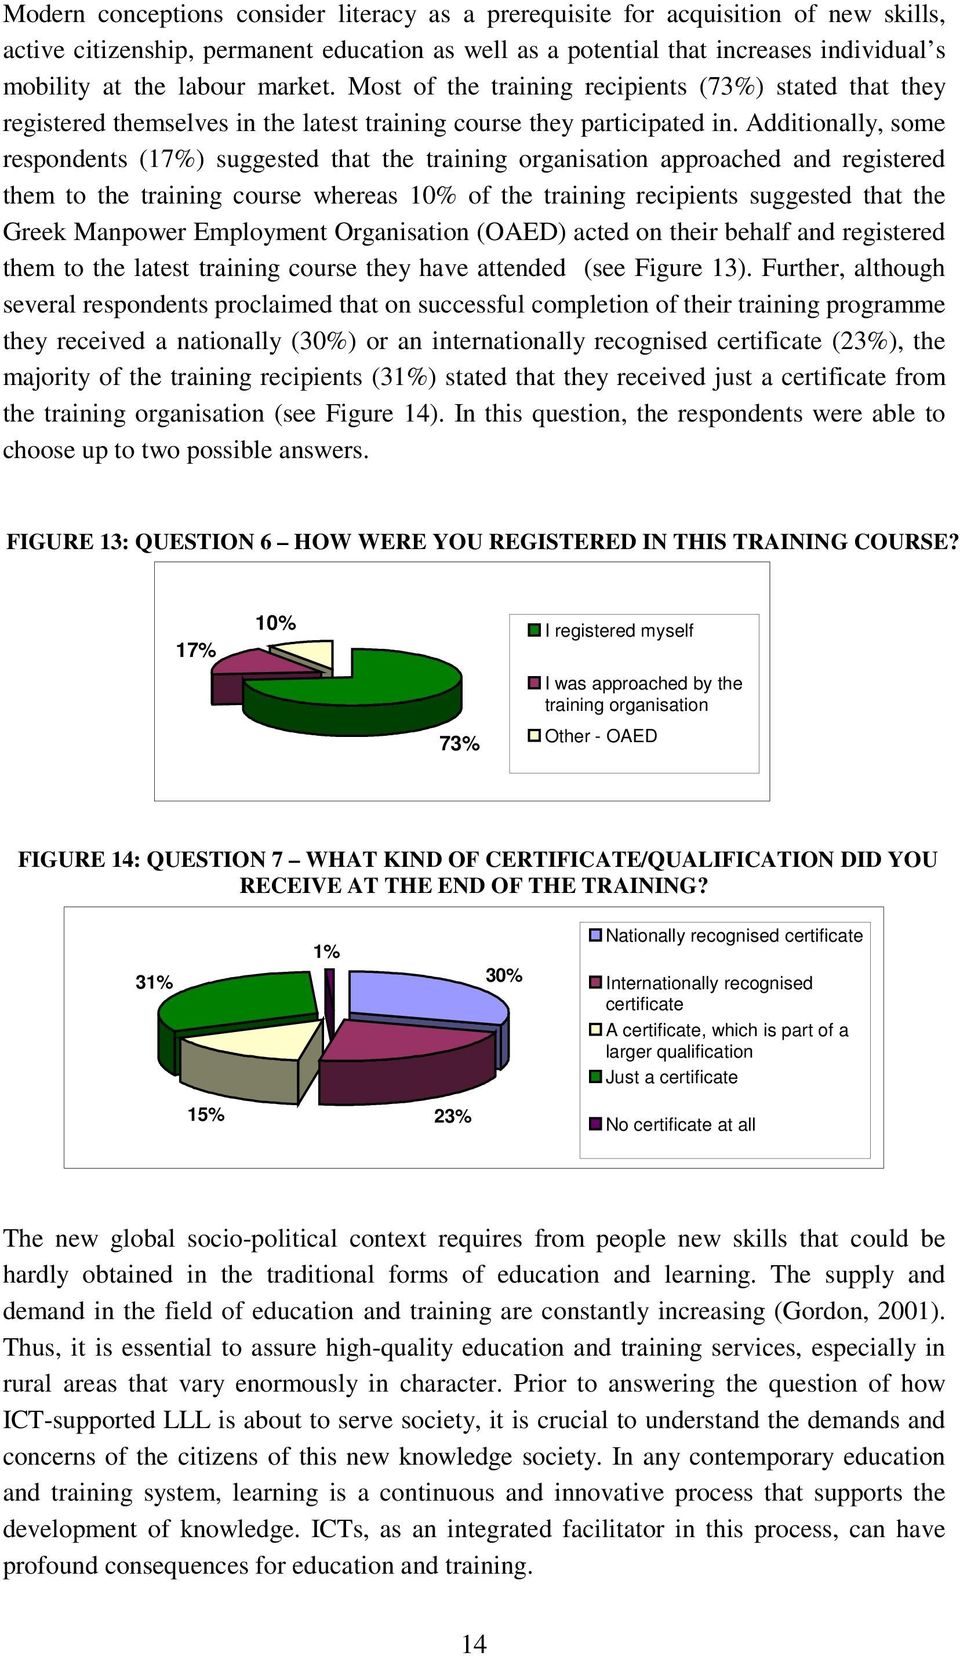 Additionally, some respondents (17%) suggested that the training organisation approached and registered them to the training course whereas 10% of the training recipients suggested that the Greek